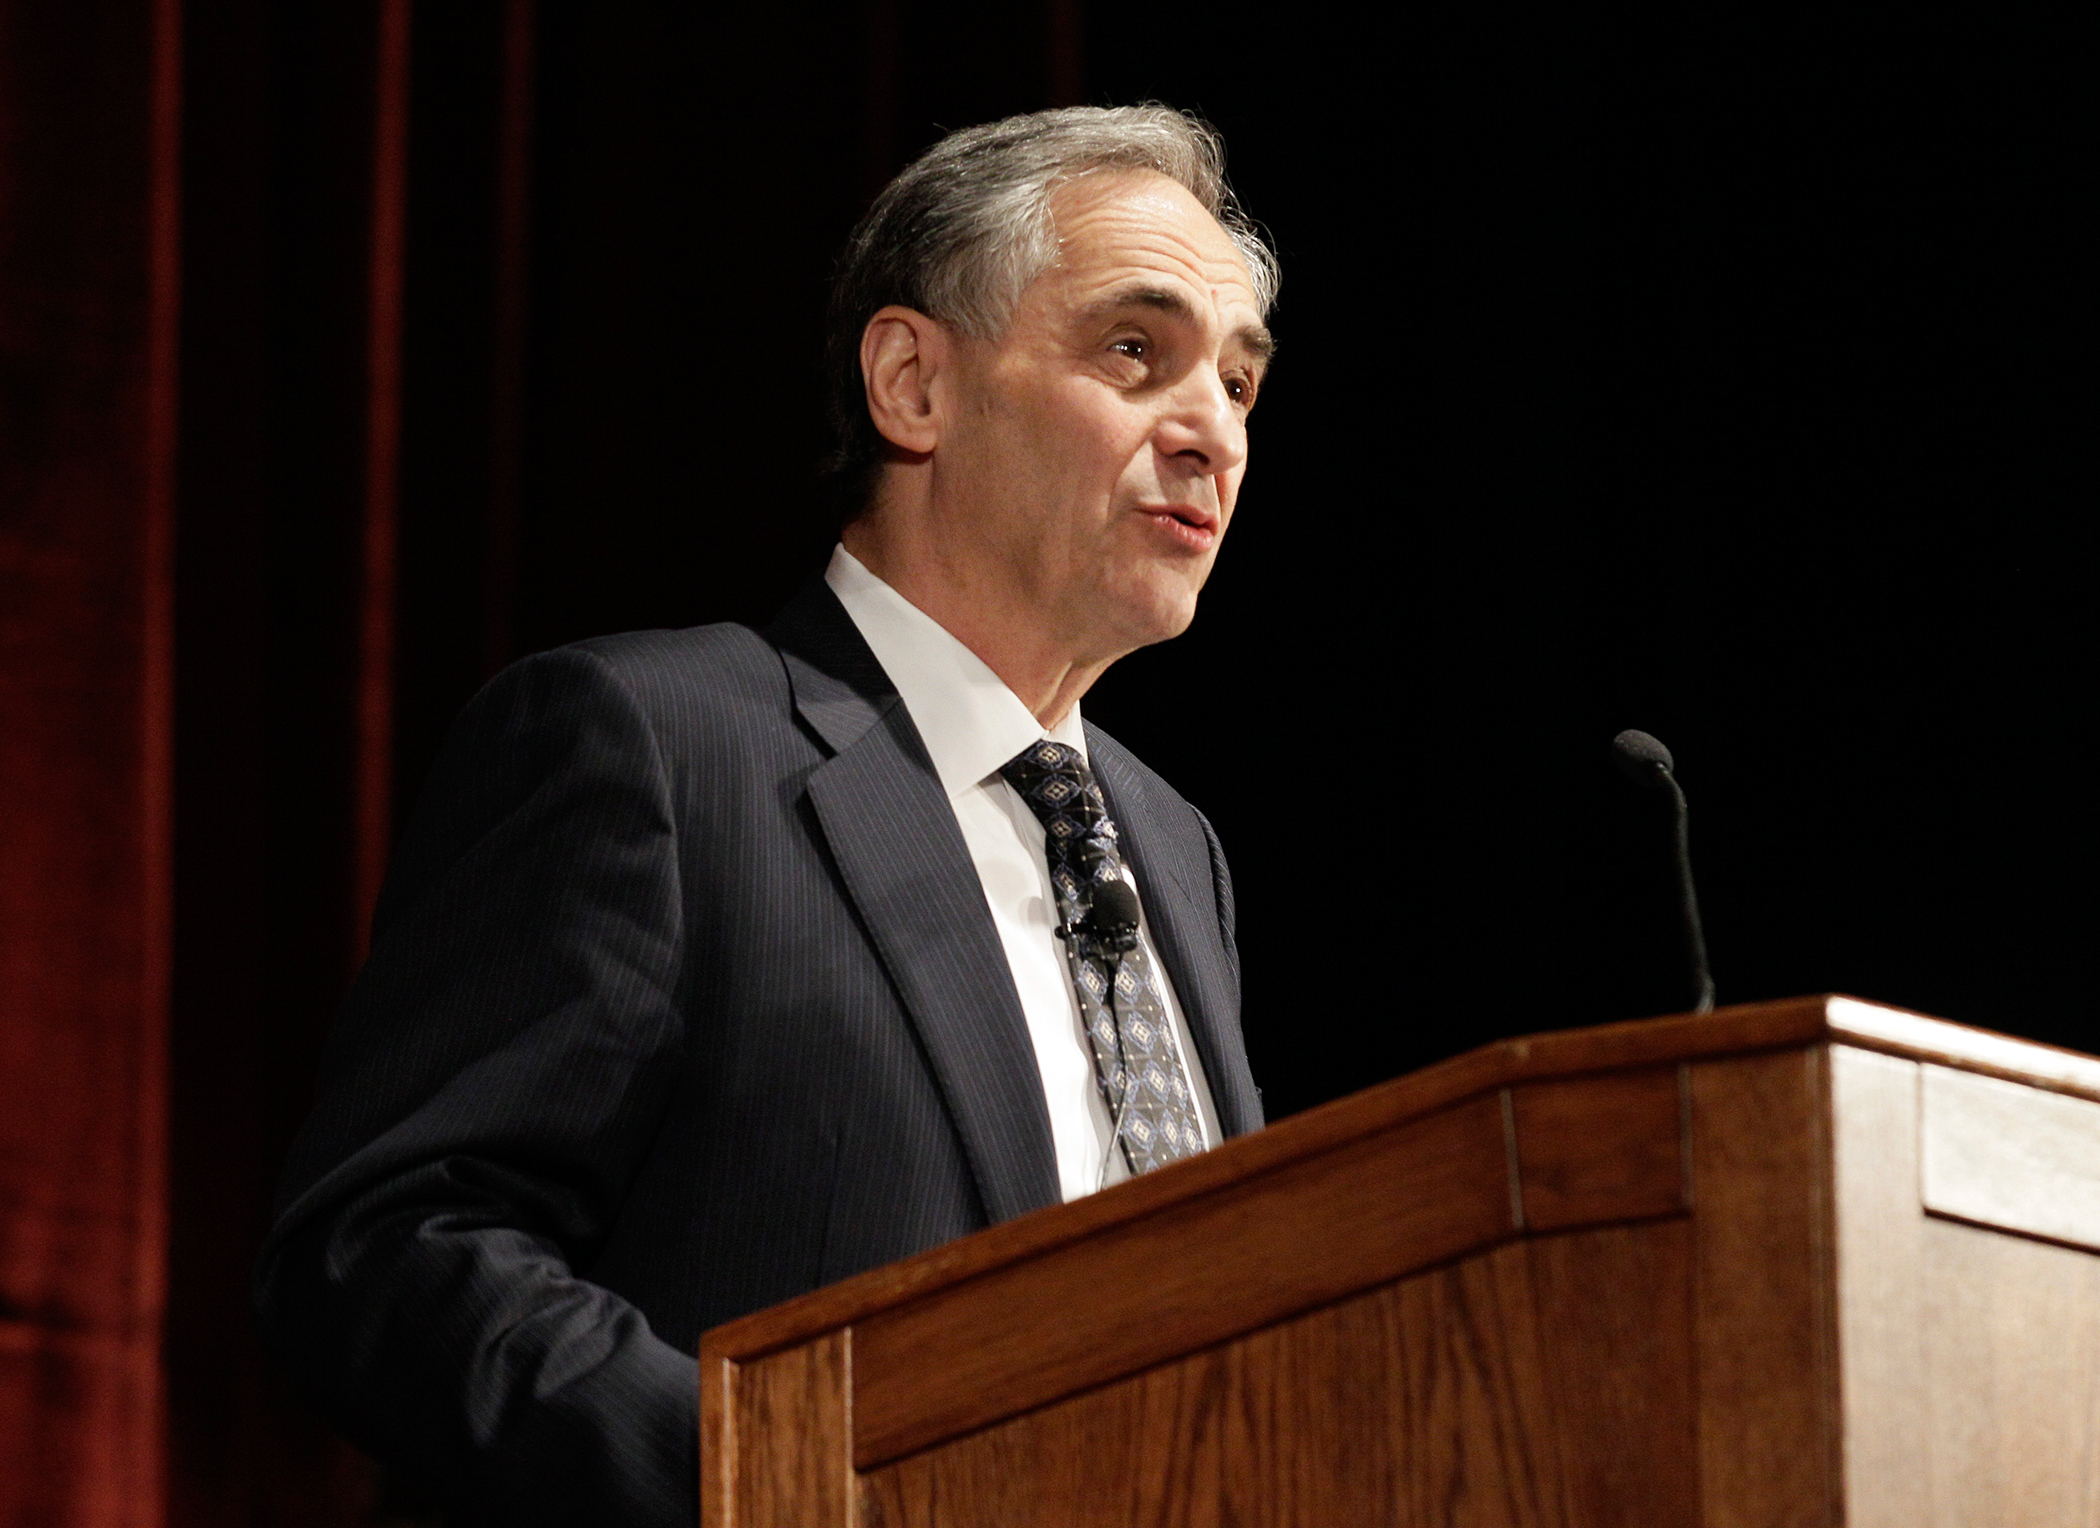 Robert Zimmer, president, University of Chicago, speaks during a panel discussion,  2012: The Path to the Presidency , at the University of Chicago in Chicago on Thursday, Jan. 19, 2012.